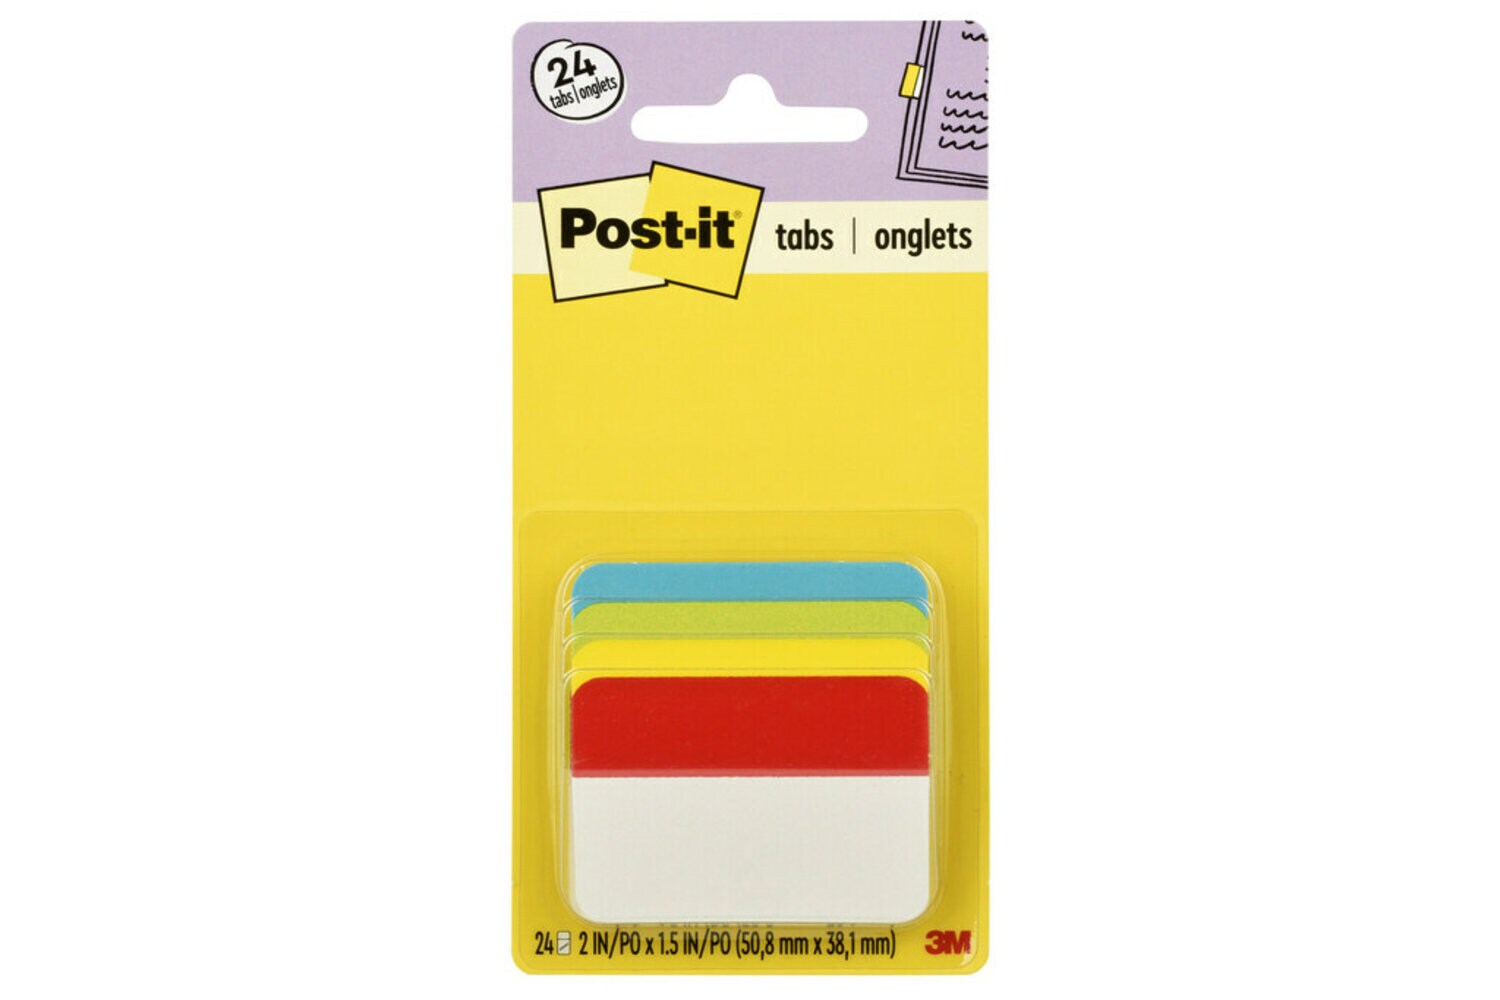 7010371173 - Post-it Filing Angle Tabs 686A-ALYR, 2 in. x 1.5 in. (50,8 mm x 38.1
mm)